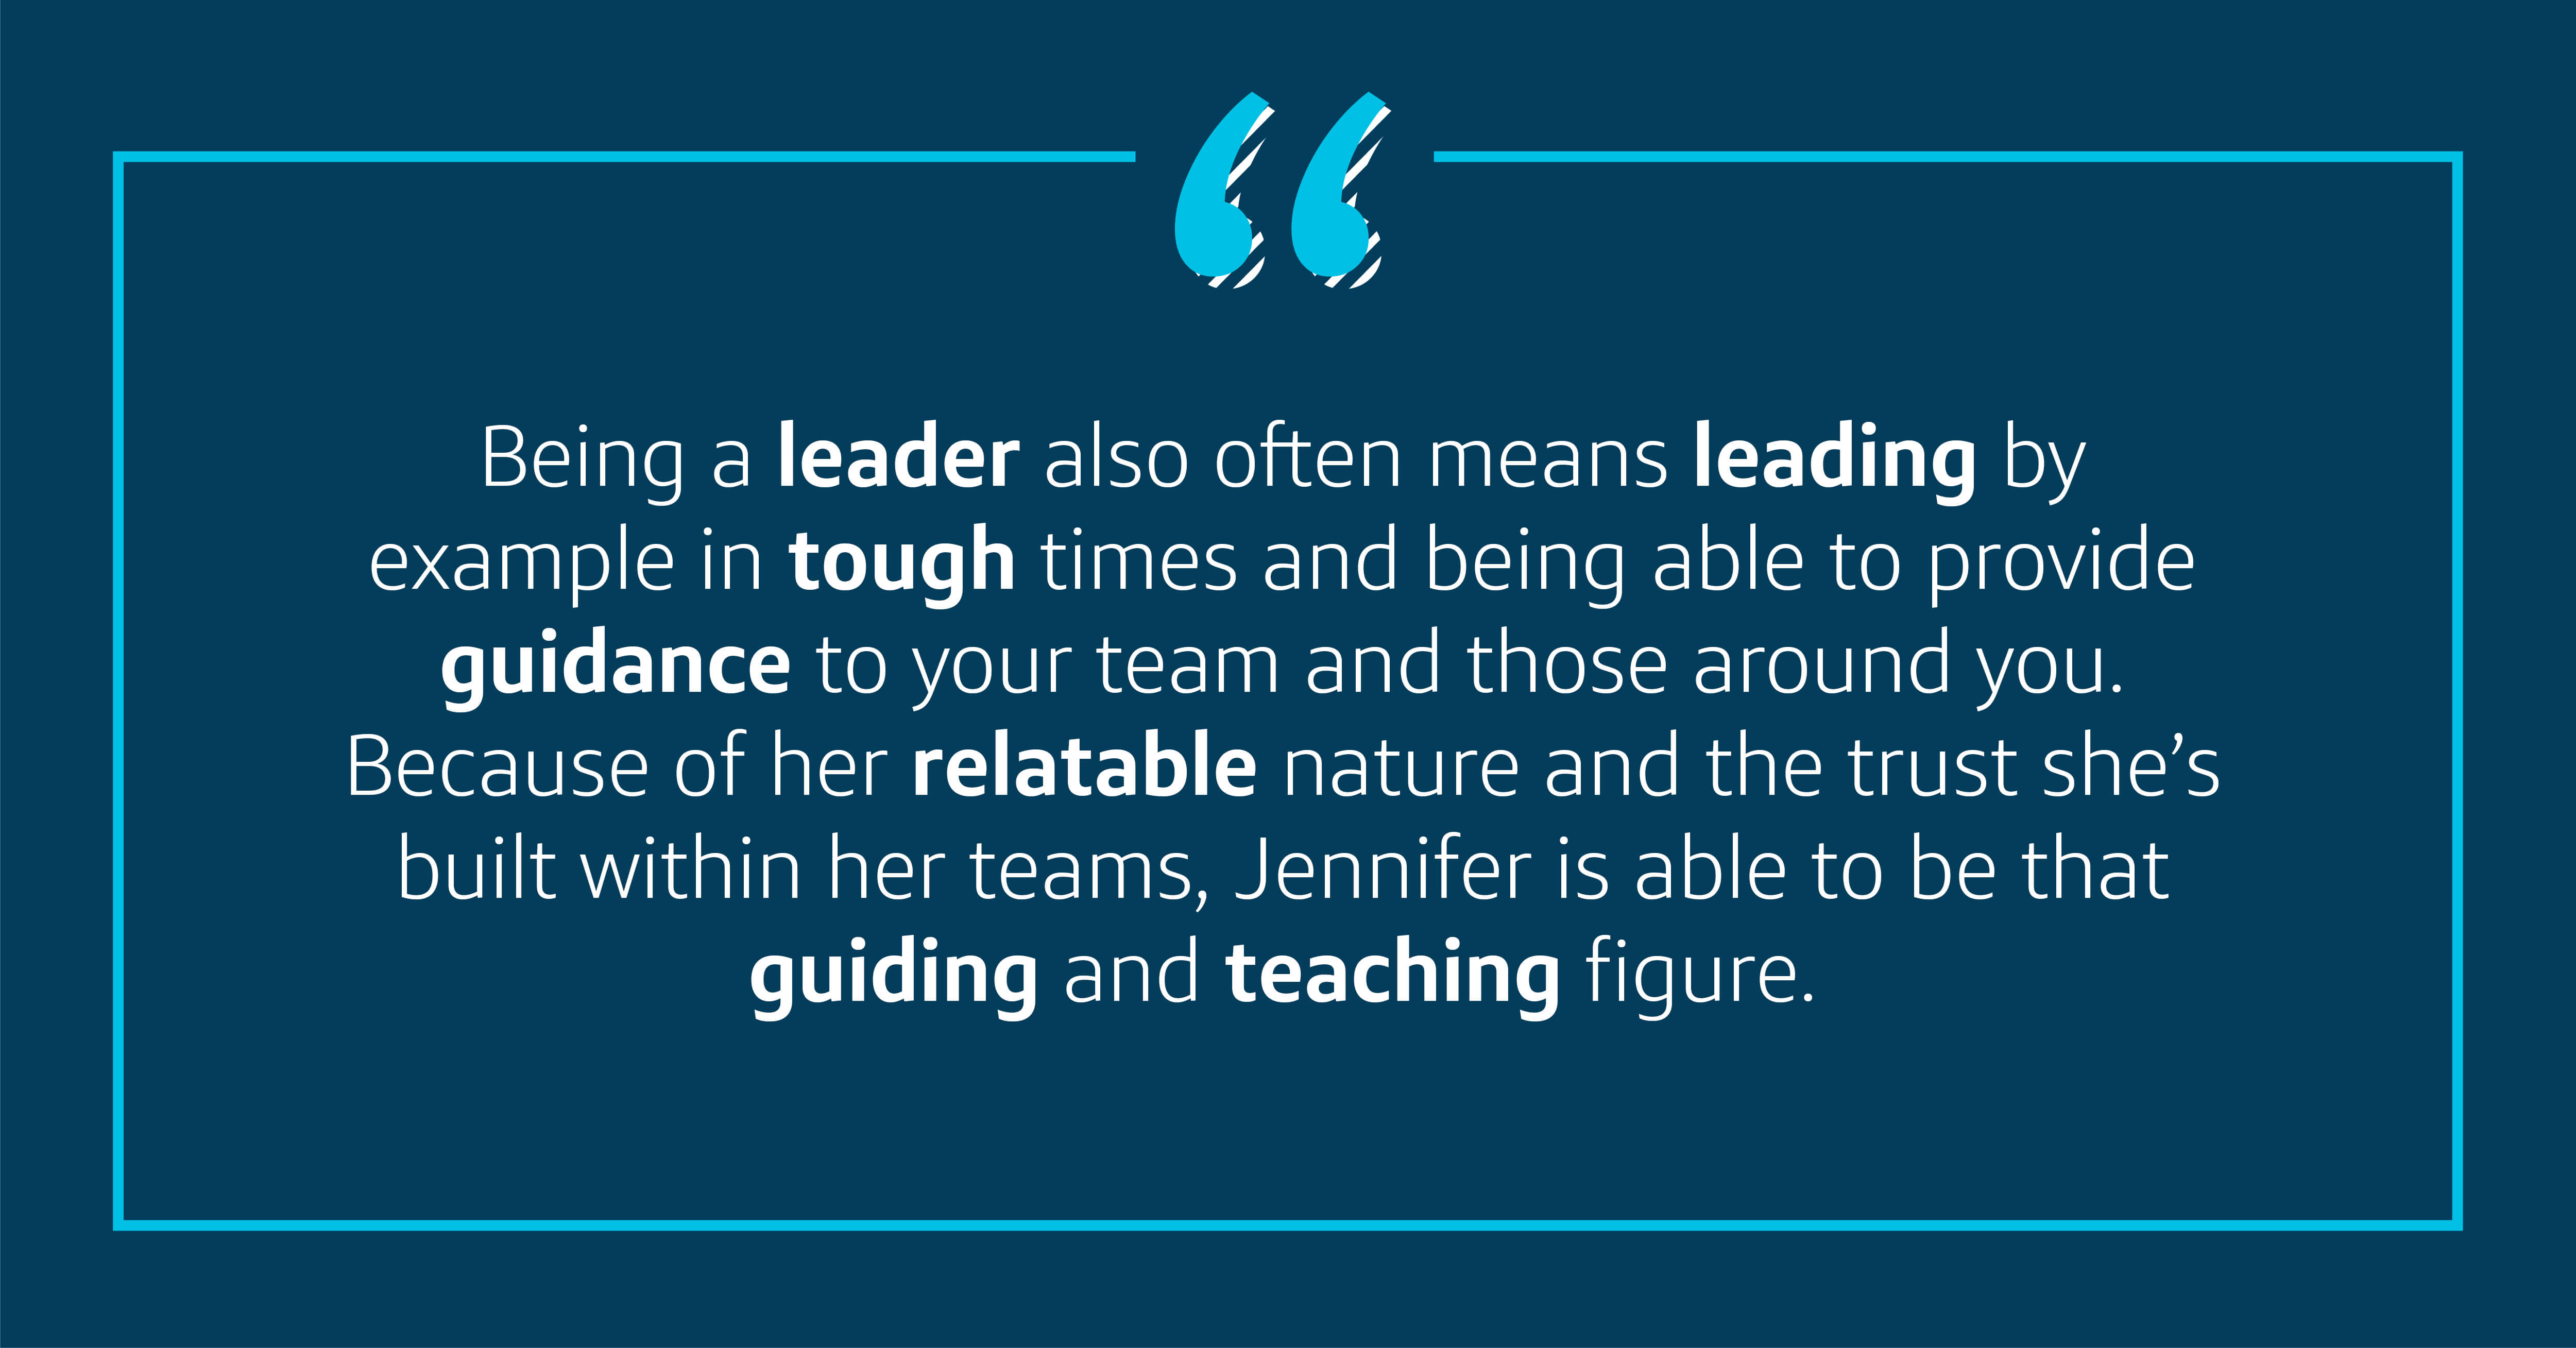 Being a leader also often means leading by example in tough times and being able to provide guidance to your team and those around you. Because of her relatable nature and the trust she’s built within her teams, Jennifer is able to be that guiding teacher.